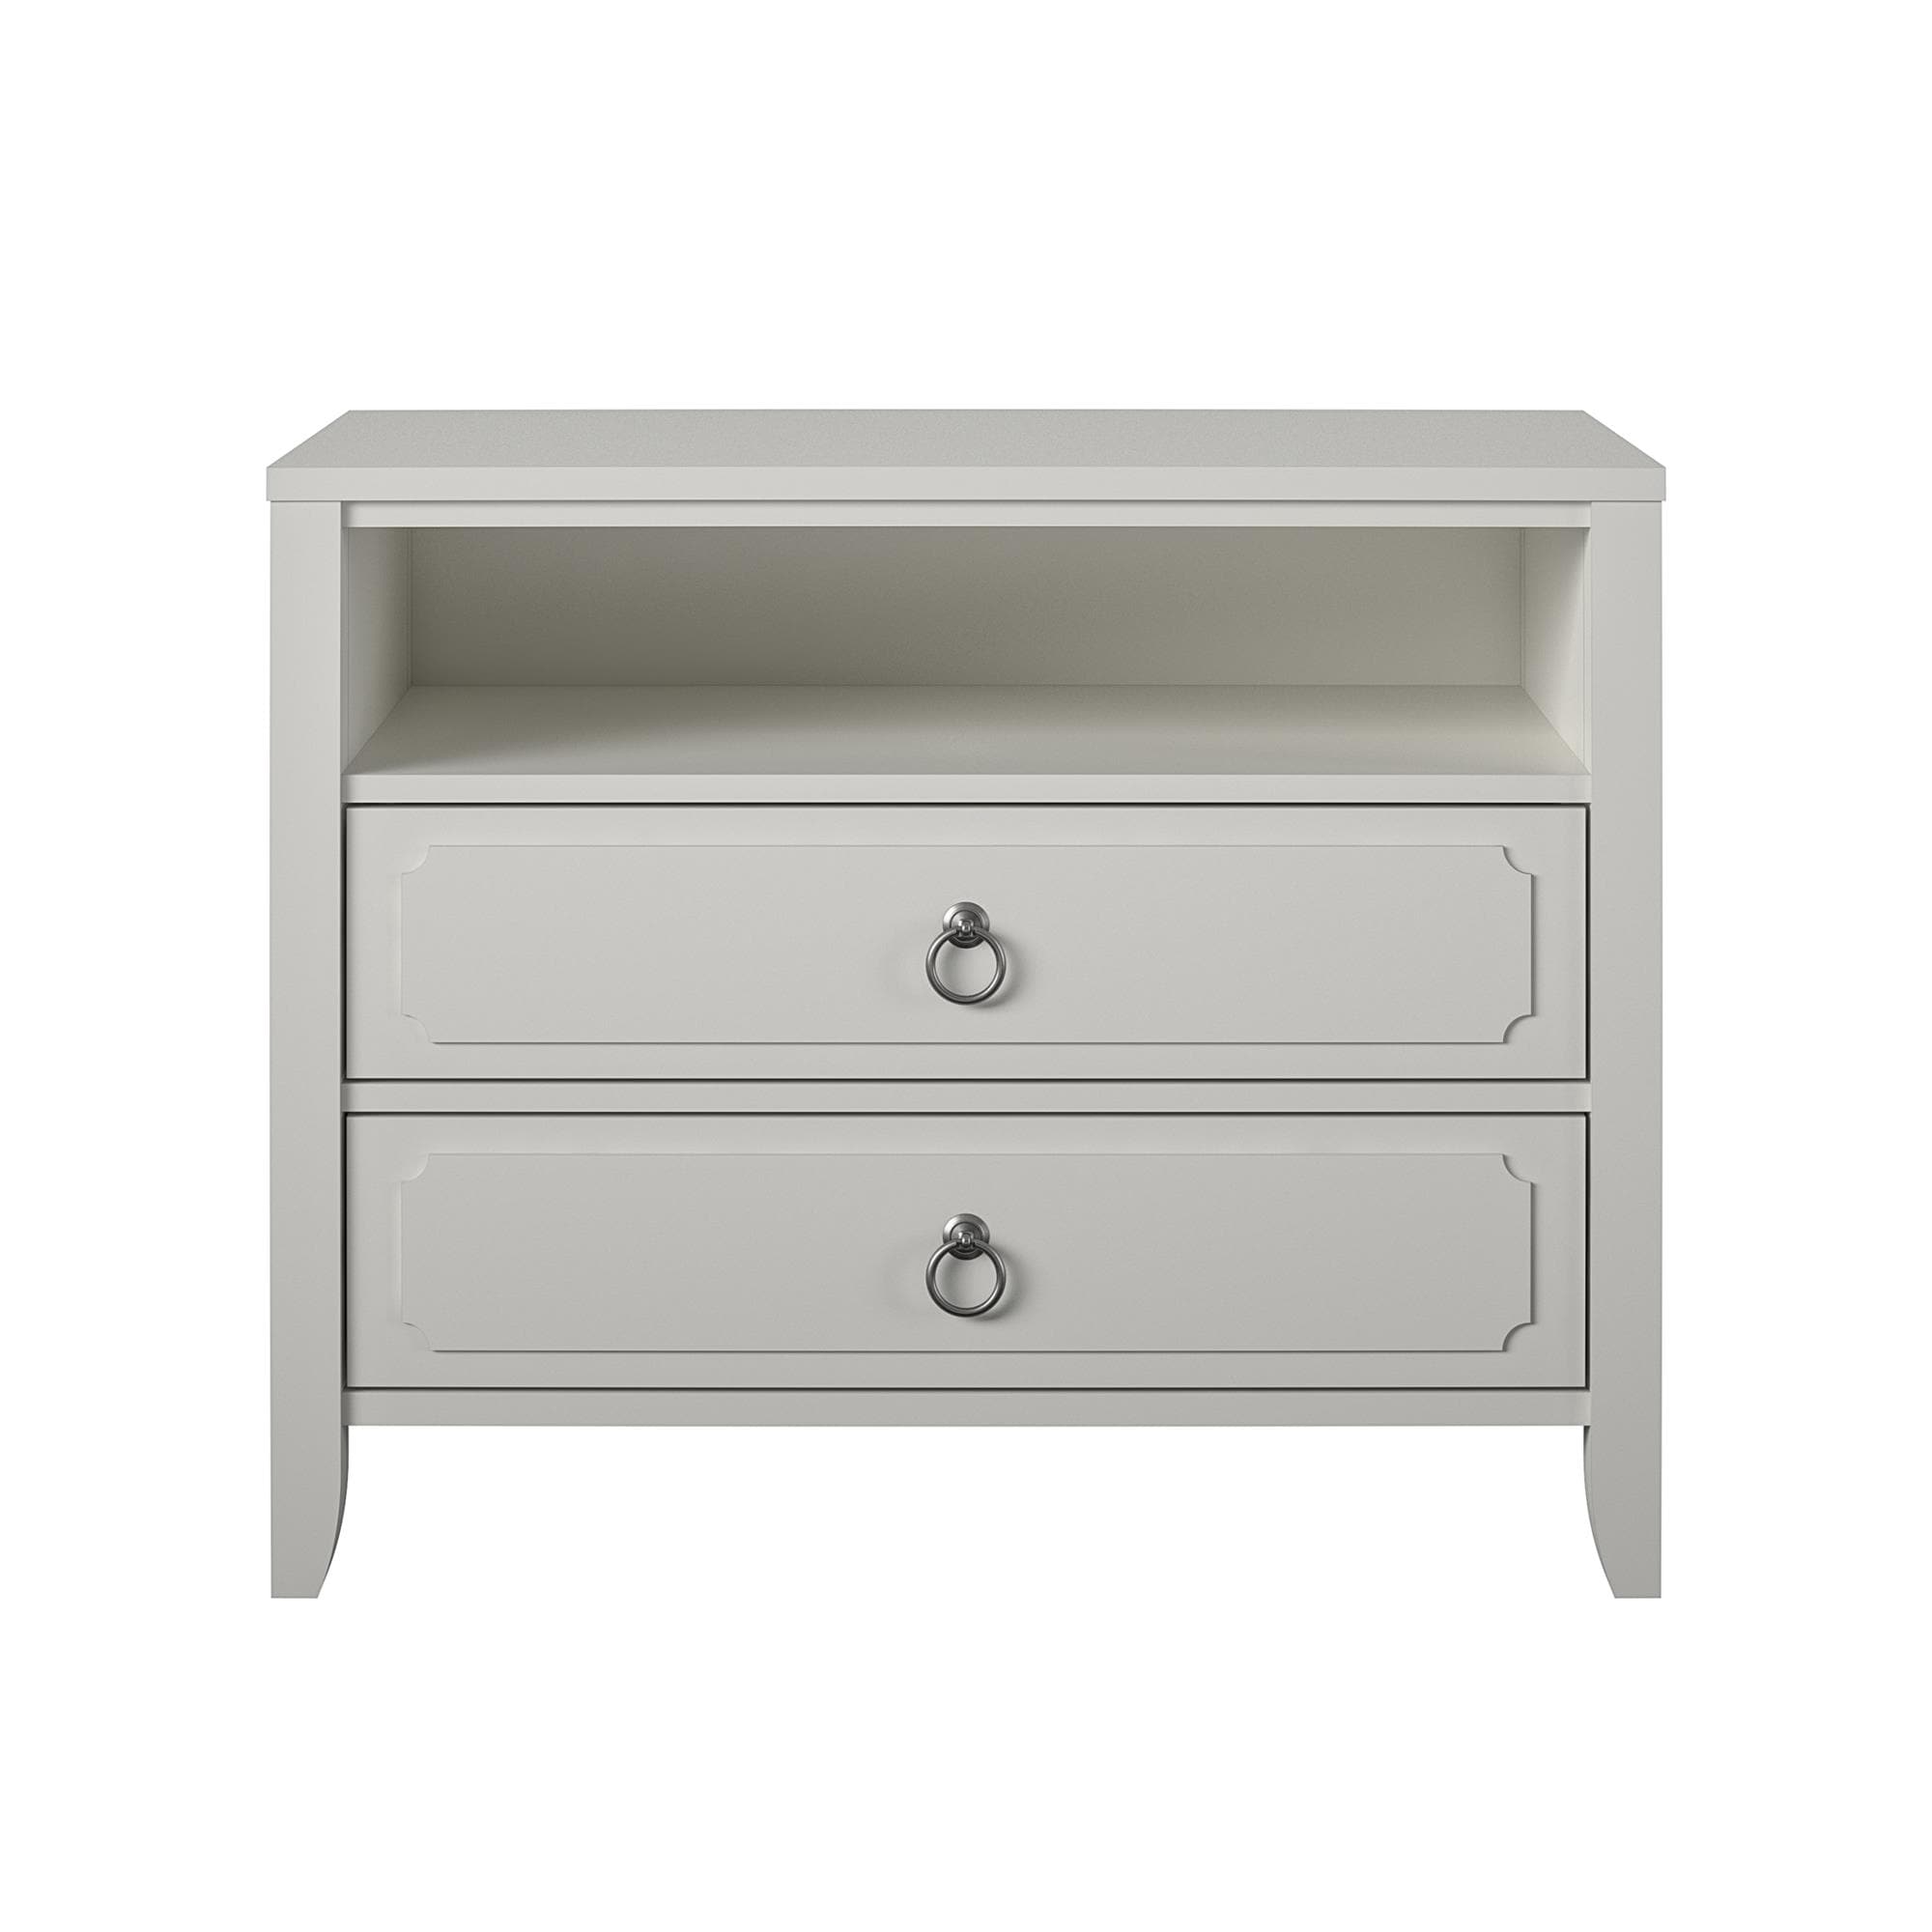 Ameriwood Home Her Majesty 2 Drawer Nightstand, Soft White in the